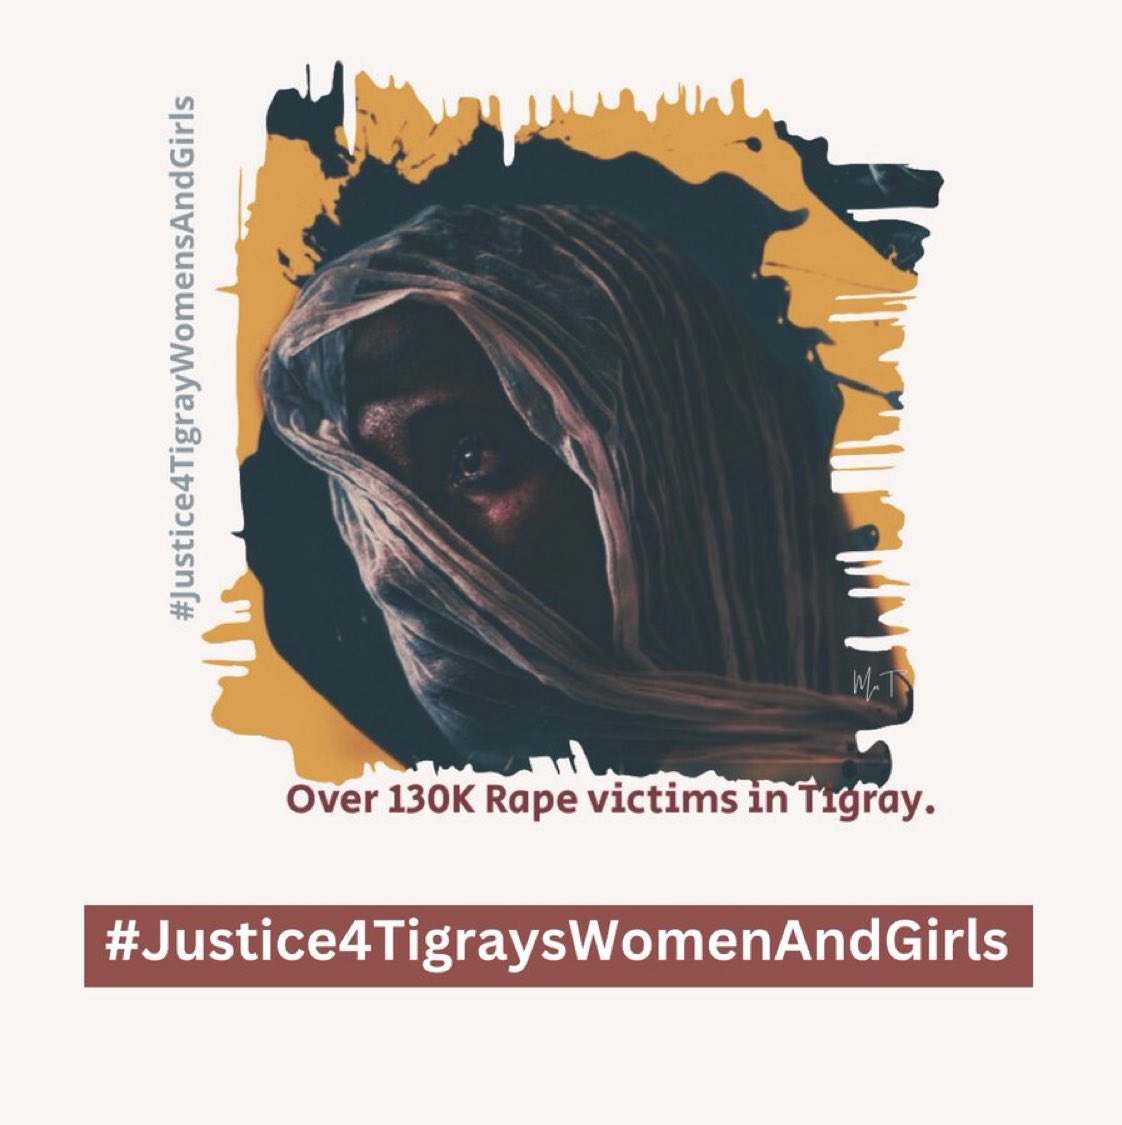 As #WorldAIDSDay unfolds, we can’t overlook the crisis in Tigray after the peace agreement. The cries of + 130K rape victims,#Tigray'an women,persist for justice. It’s time for the world to respond urgently. #Justice4TigraysWomenAndGirls @UN @UN_Women @UN_HRC @EUCouncil @wegahtta